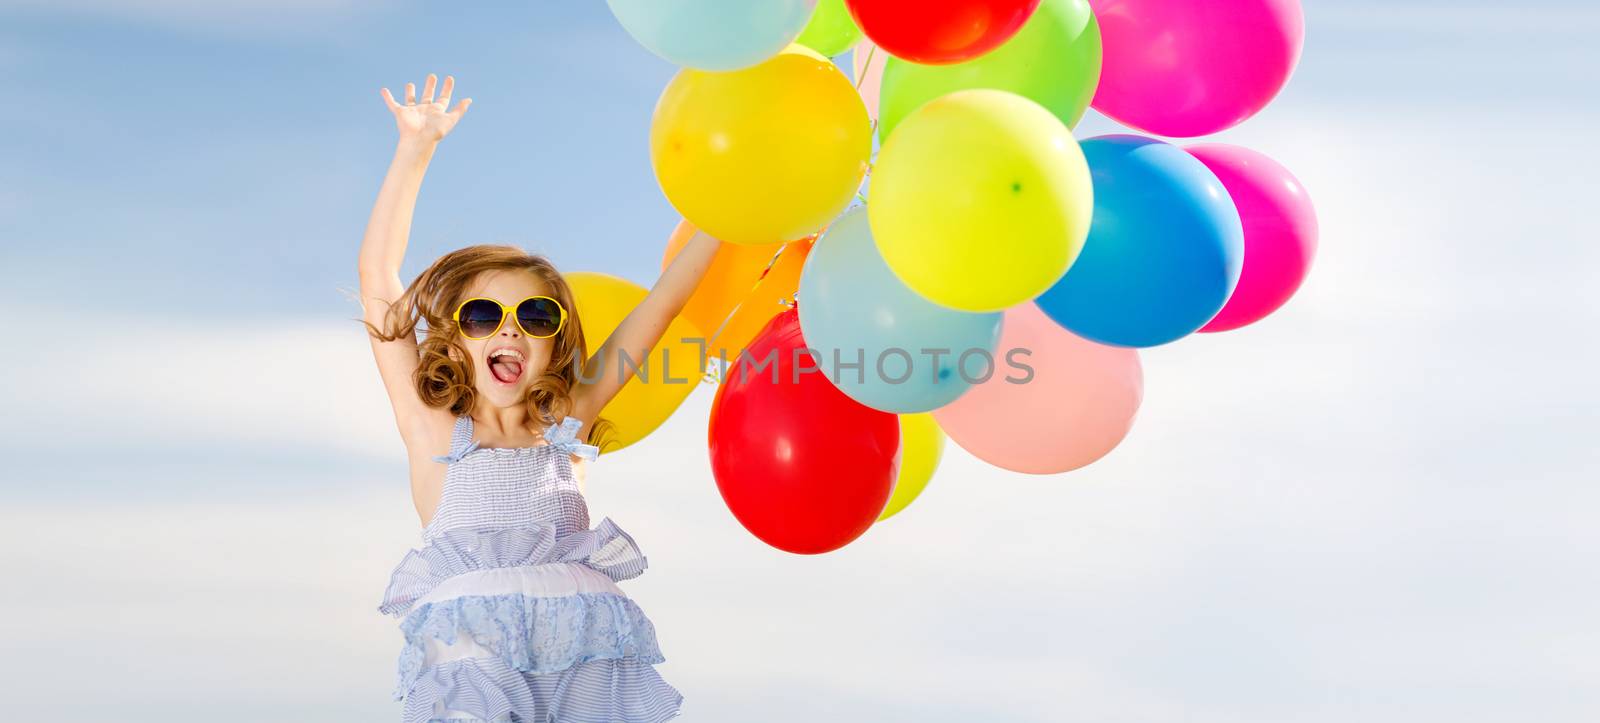 summer holidays, celebration, children and people concept - happy jumping girl with colorful balloons outdoors